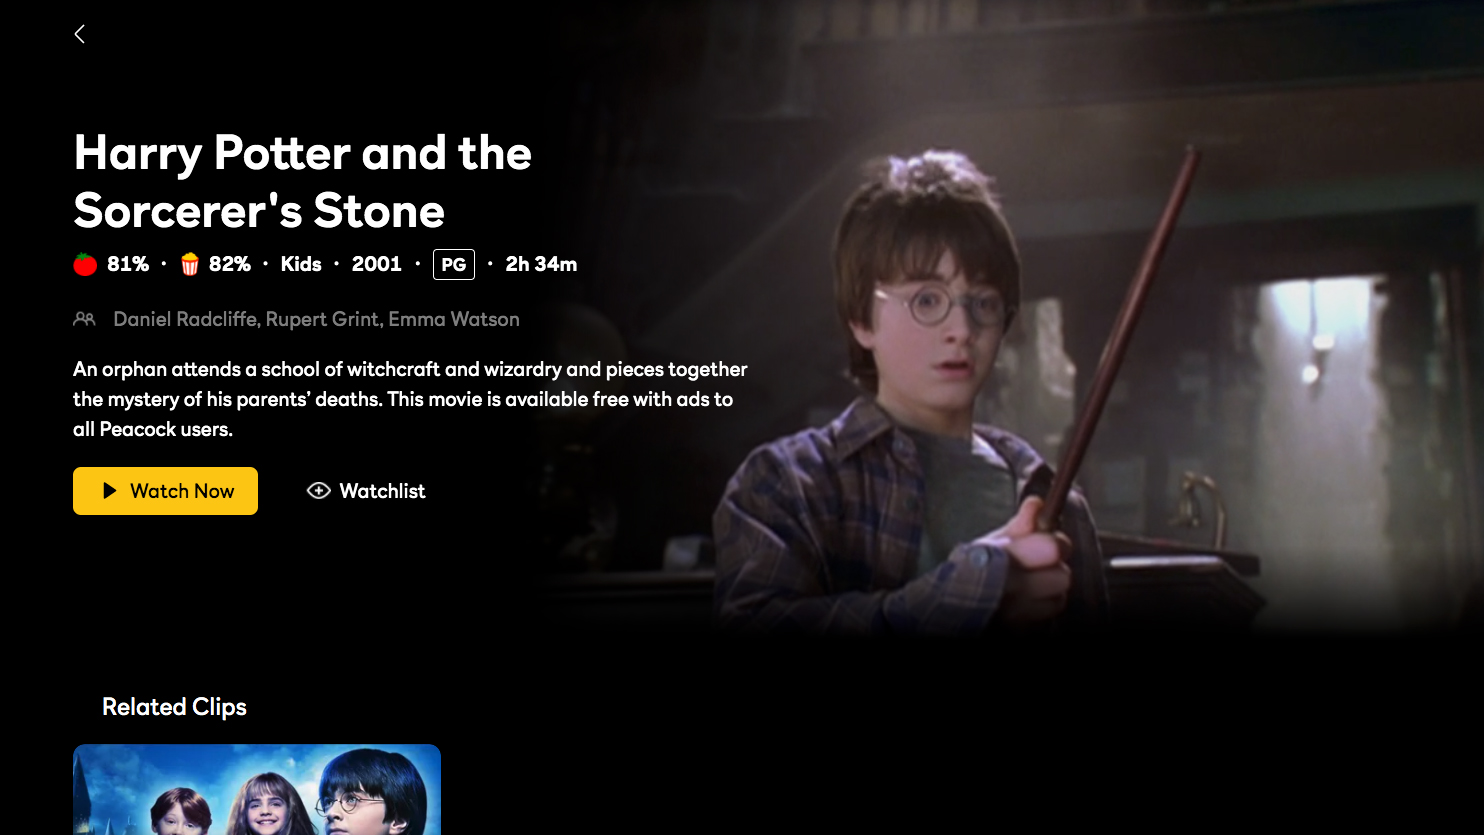 Can I watch the Harry Potter movies on my TV?